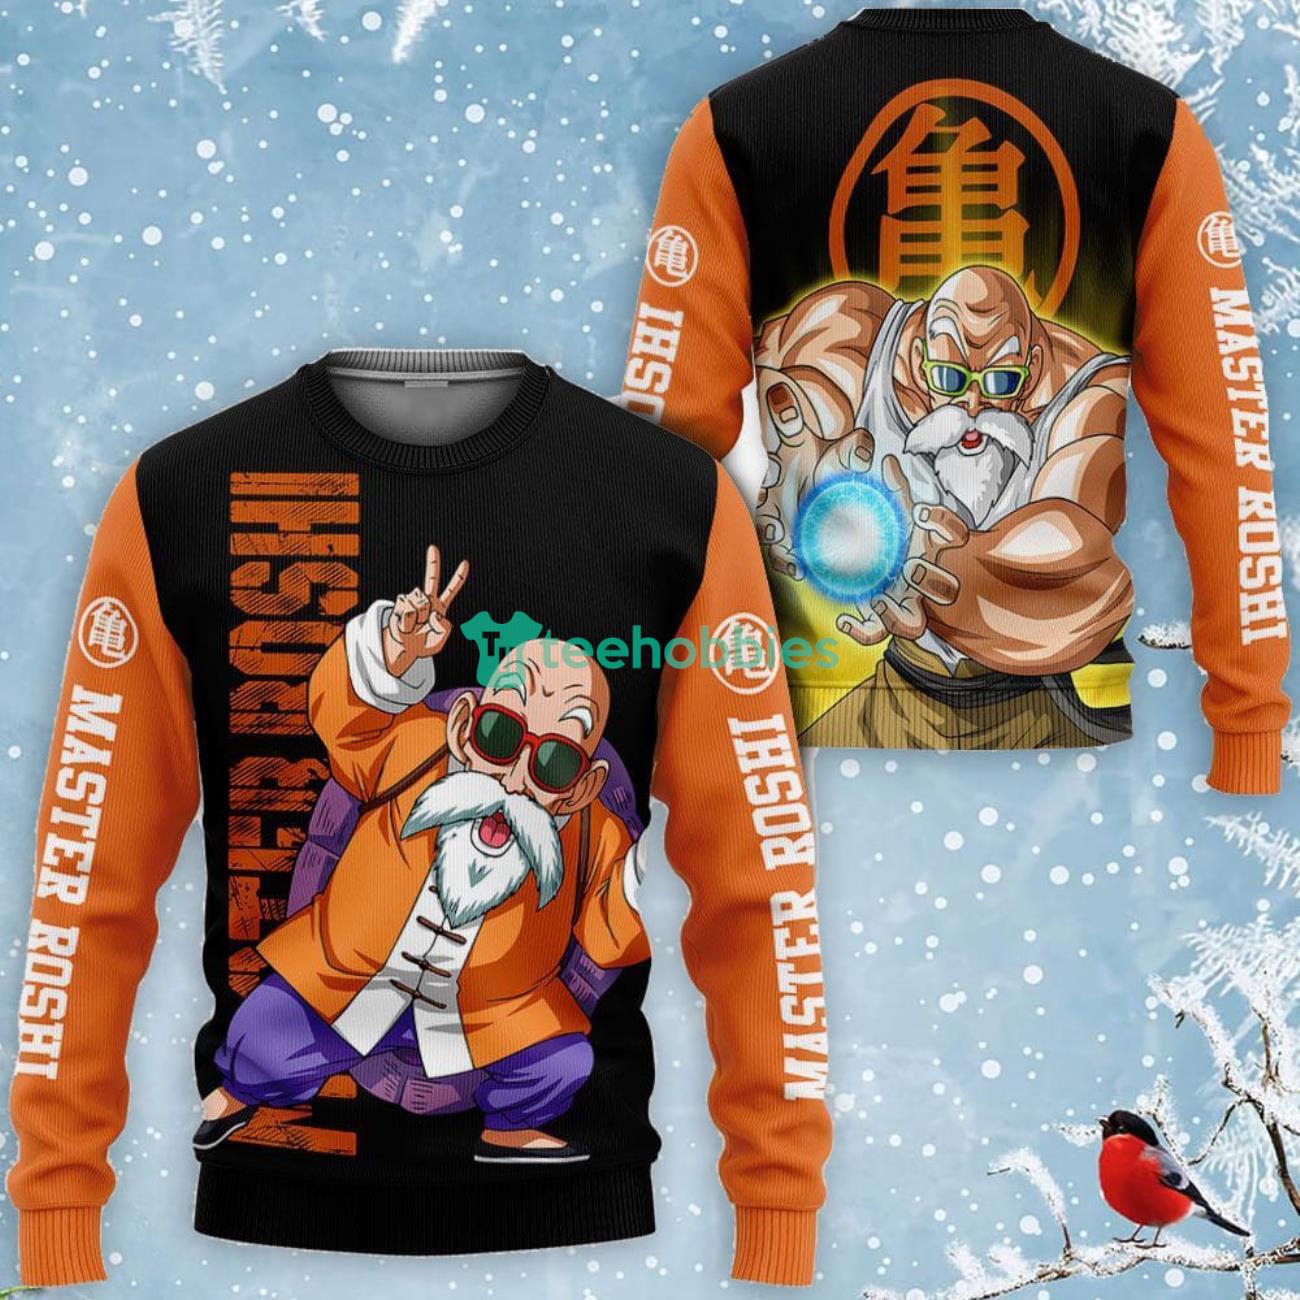 Master Roshi All Over Printed 3D Shirt Dragon Ball Anime Fans Product Photo 2 Product photo 2